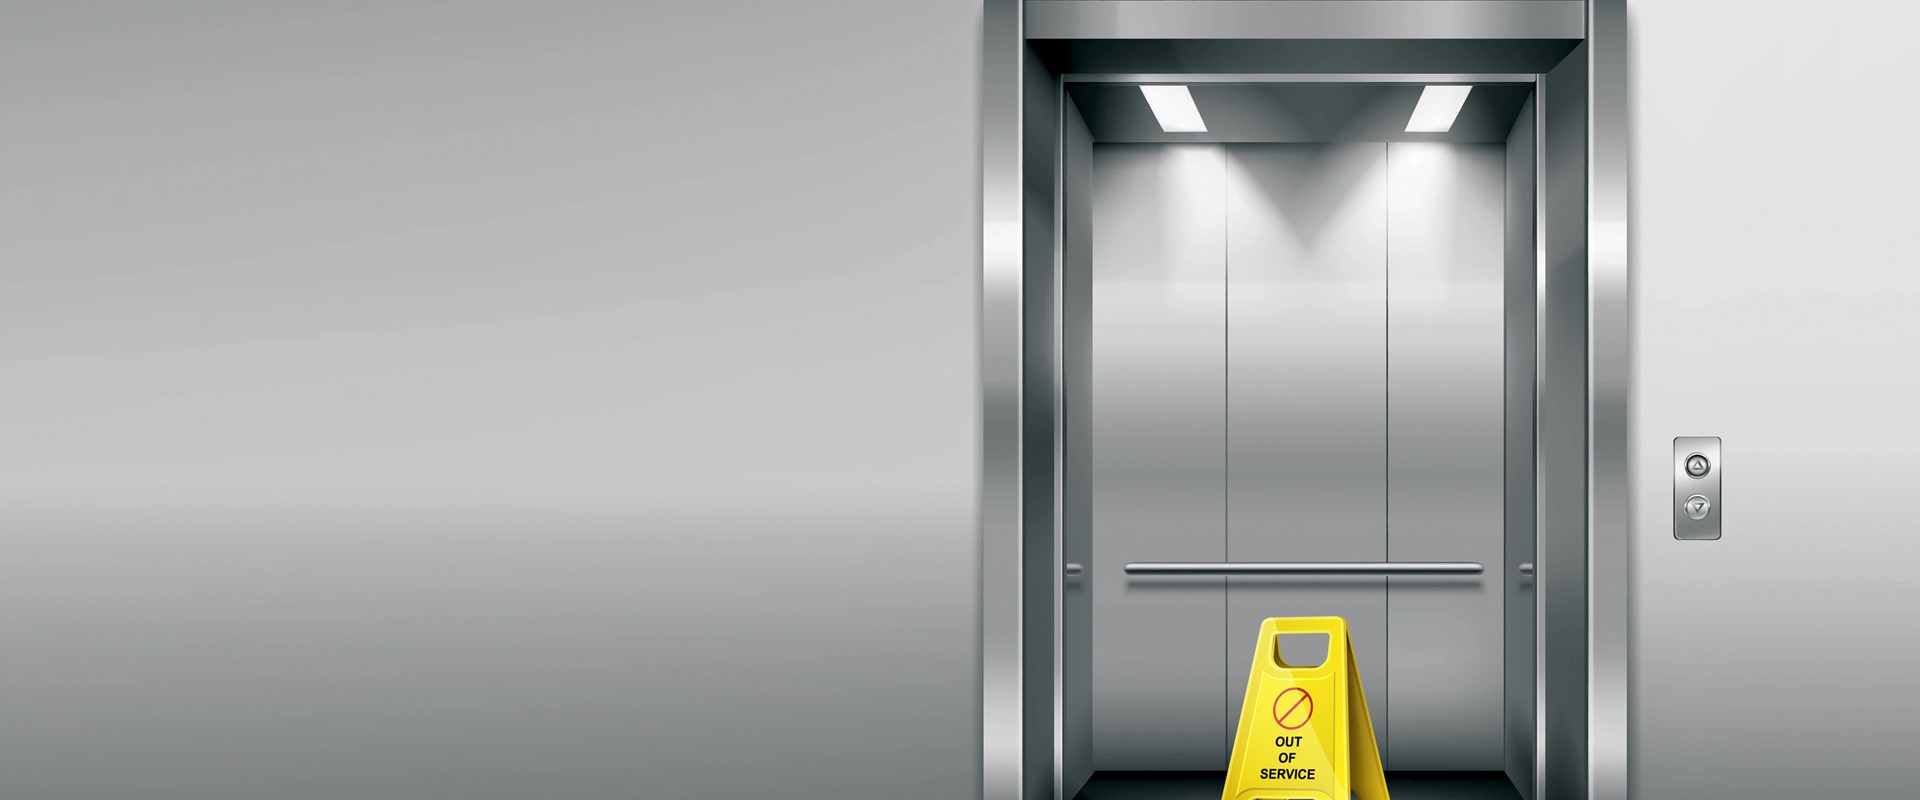 Are elevator pitches going down?